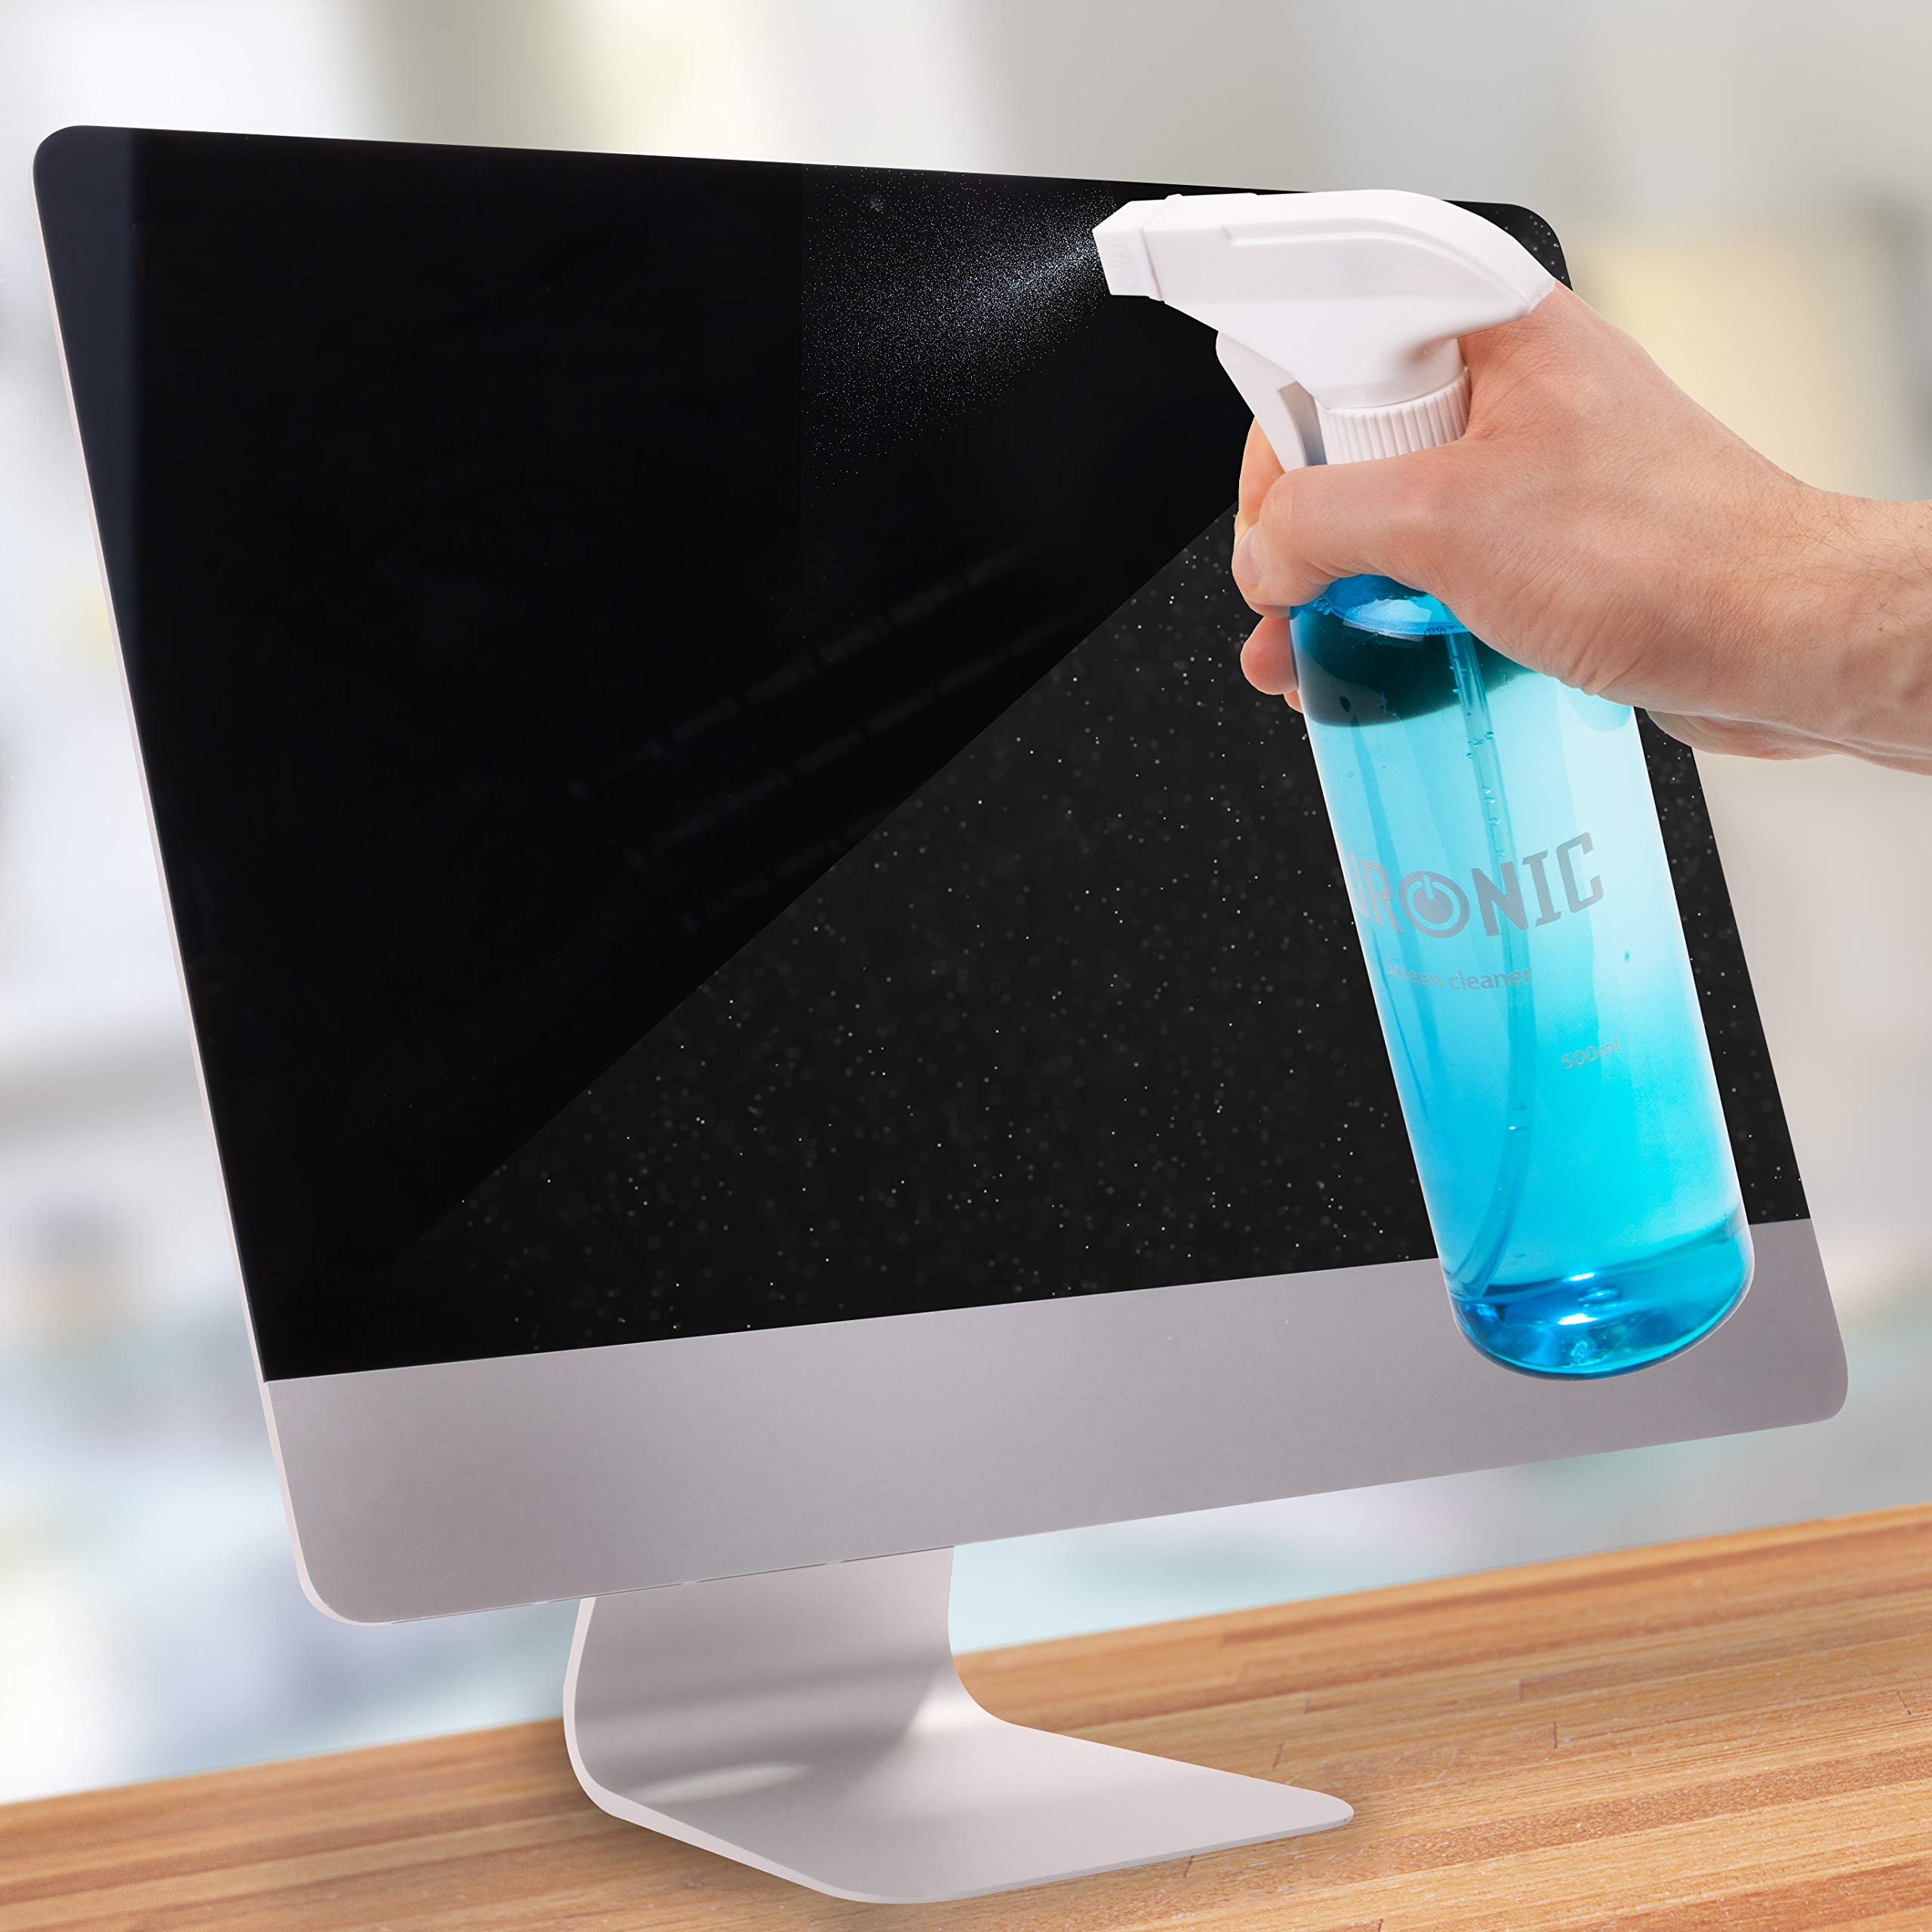 Duronic Screen Cleaner Kit SCK103, 200ml Cleaning Spray for LCD/TFT/LED/Plasma/OLED Televisions and Computer Monitors with Microfibre Cloth Ideal for Laptops, Smartphones, Televisions, Tablets